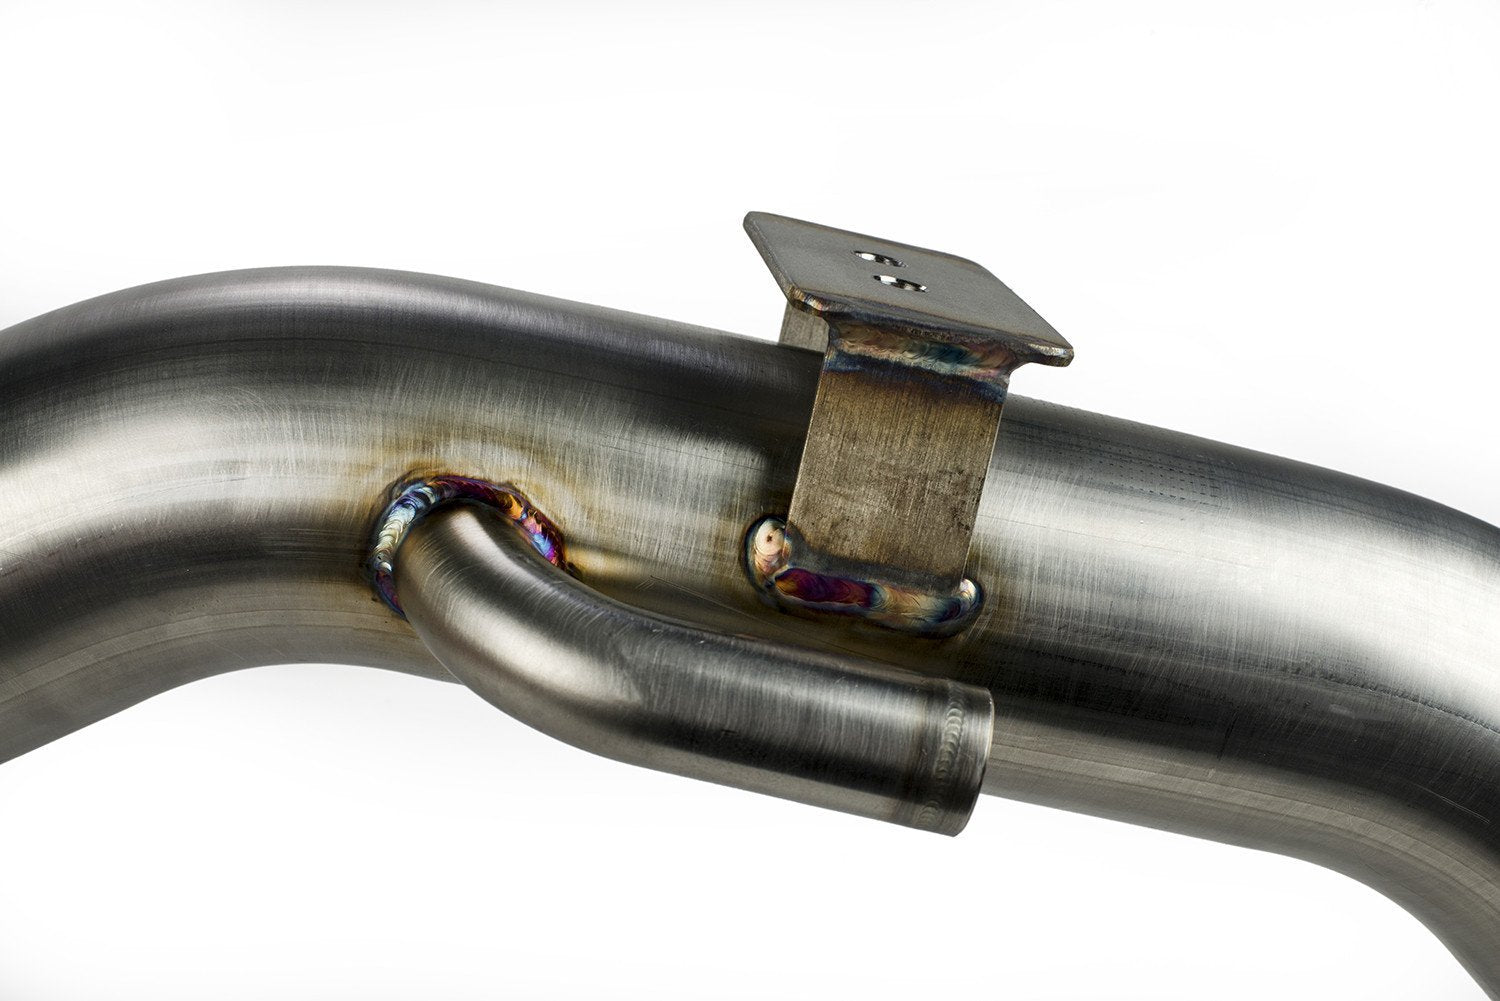 MAP Catted Mustang Ecoboost Downpipe | 2015+ Ford Mustang Ecoboost